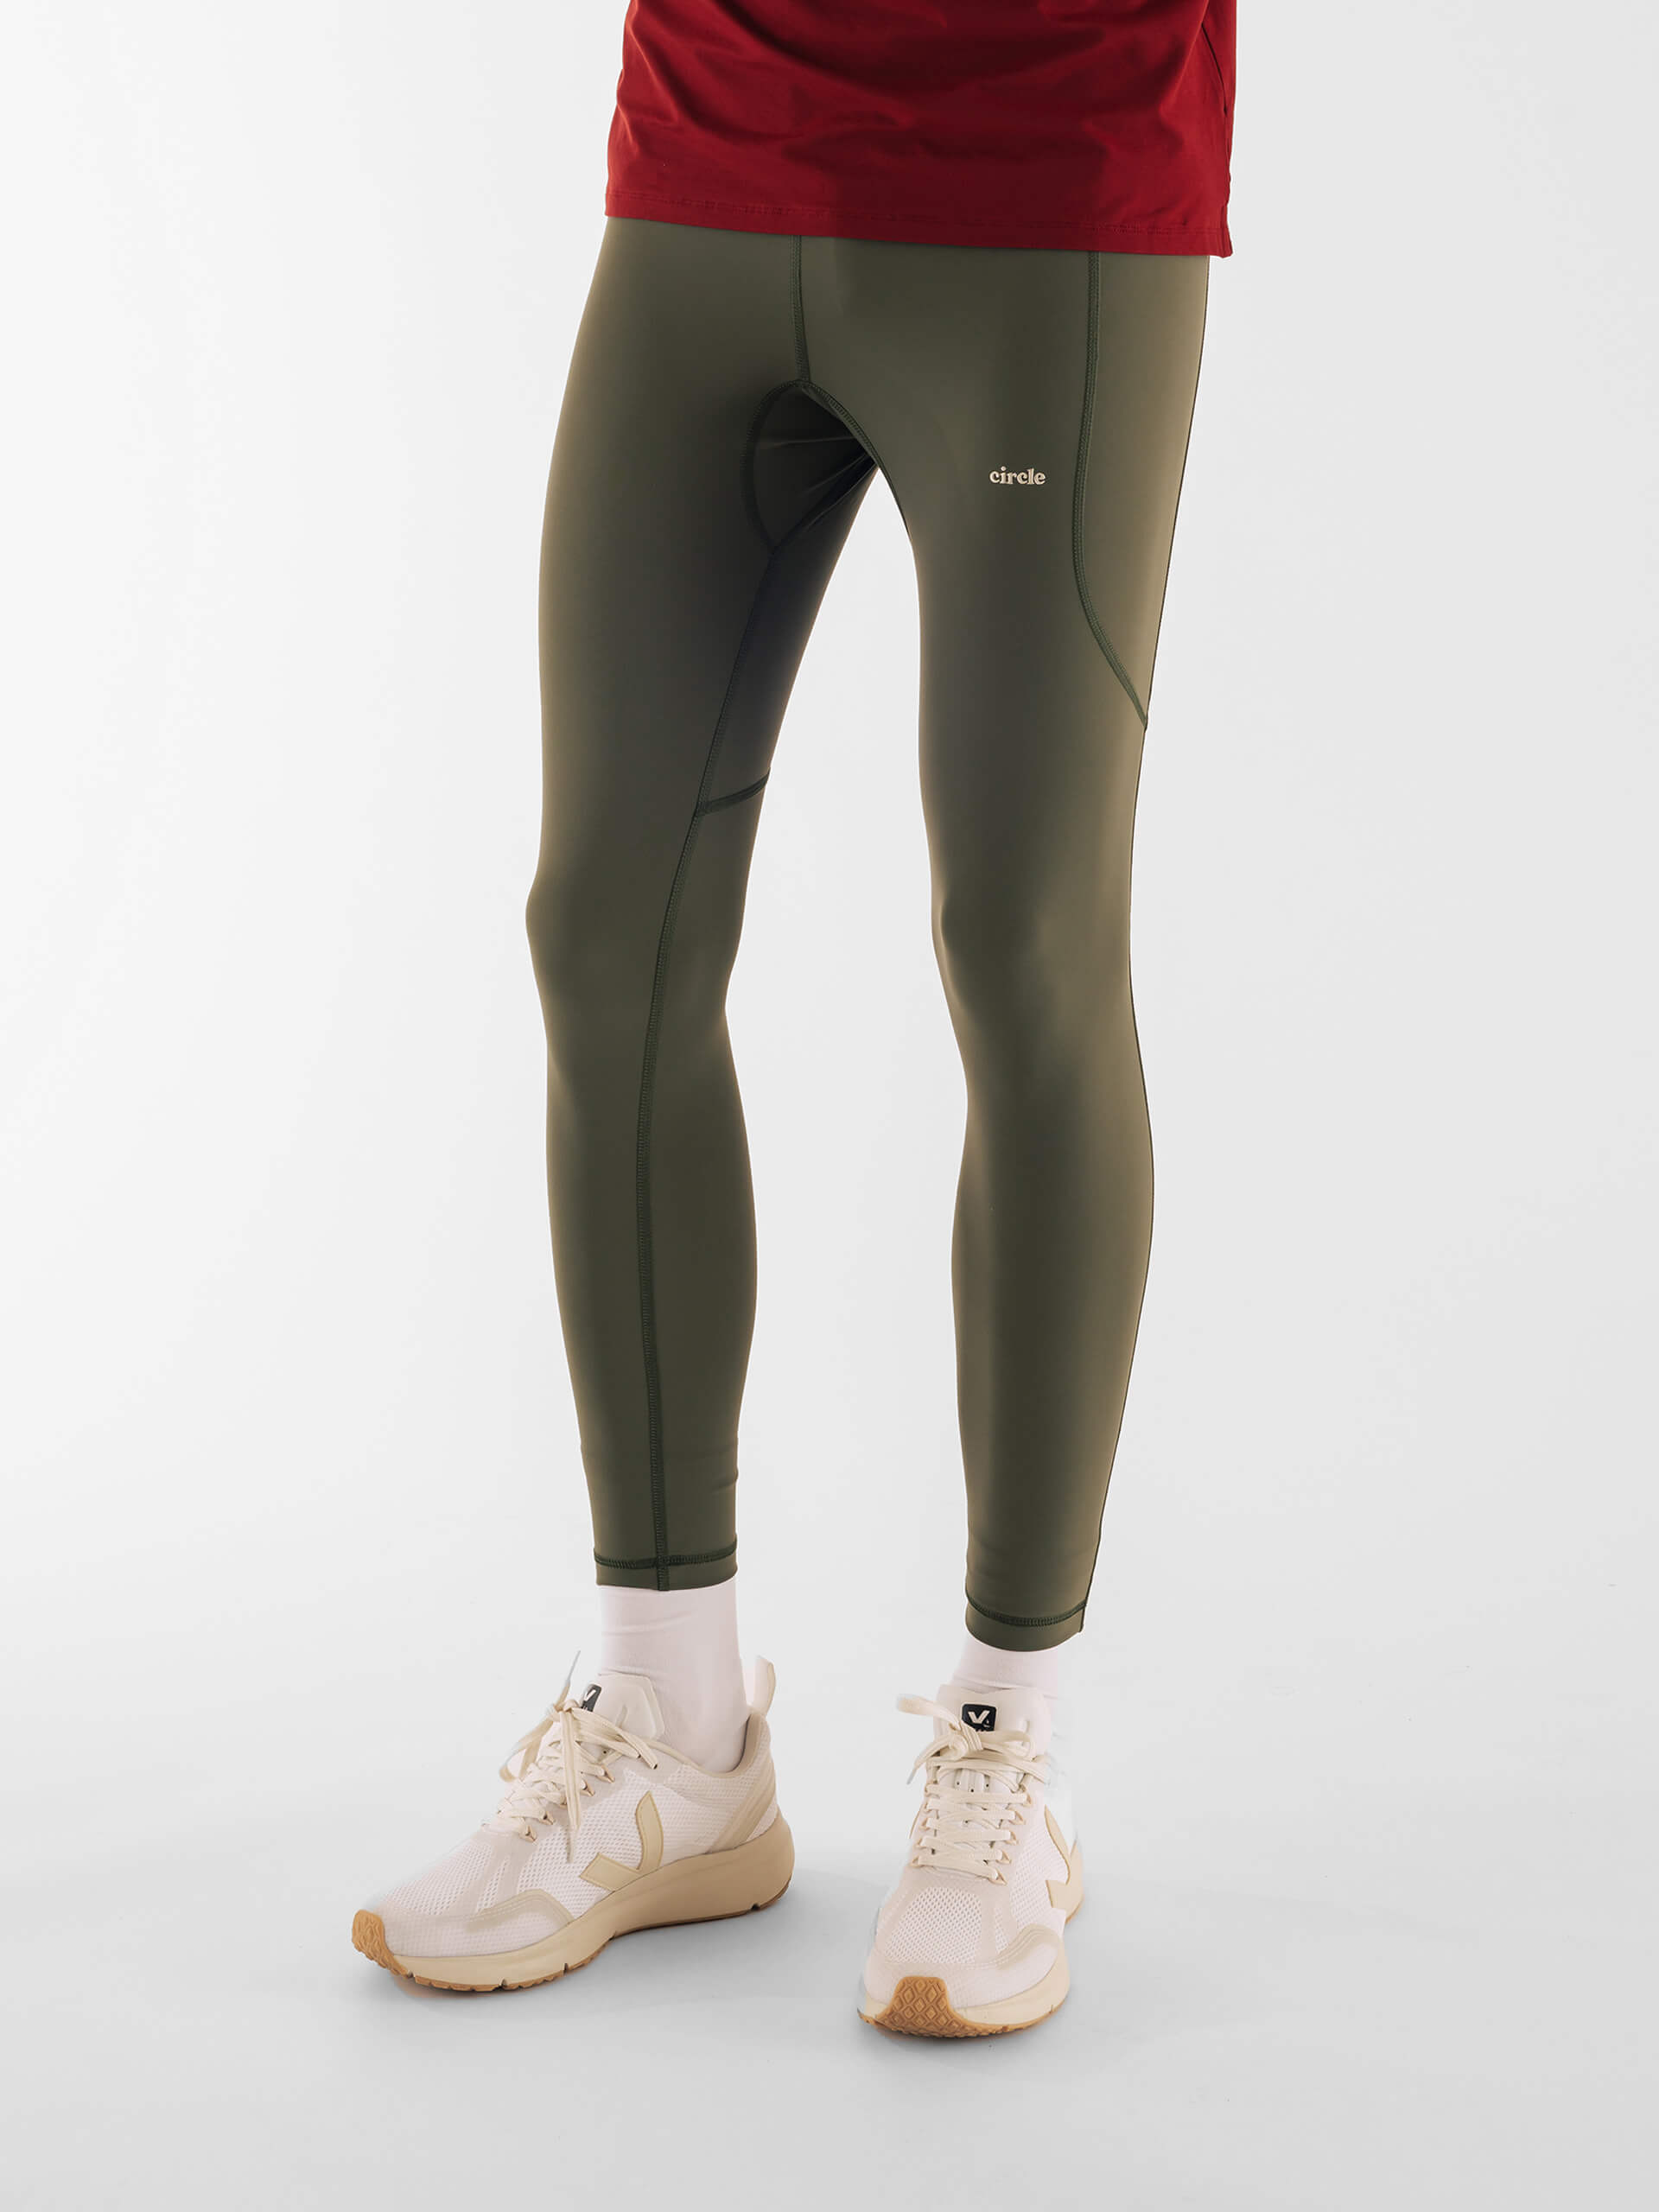 Men's Running Leggings Men in Tights  Recycled and recyclable - Circle  Sportswear